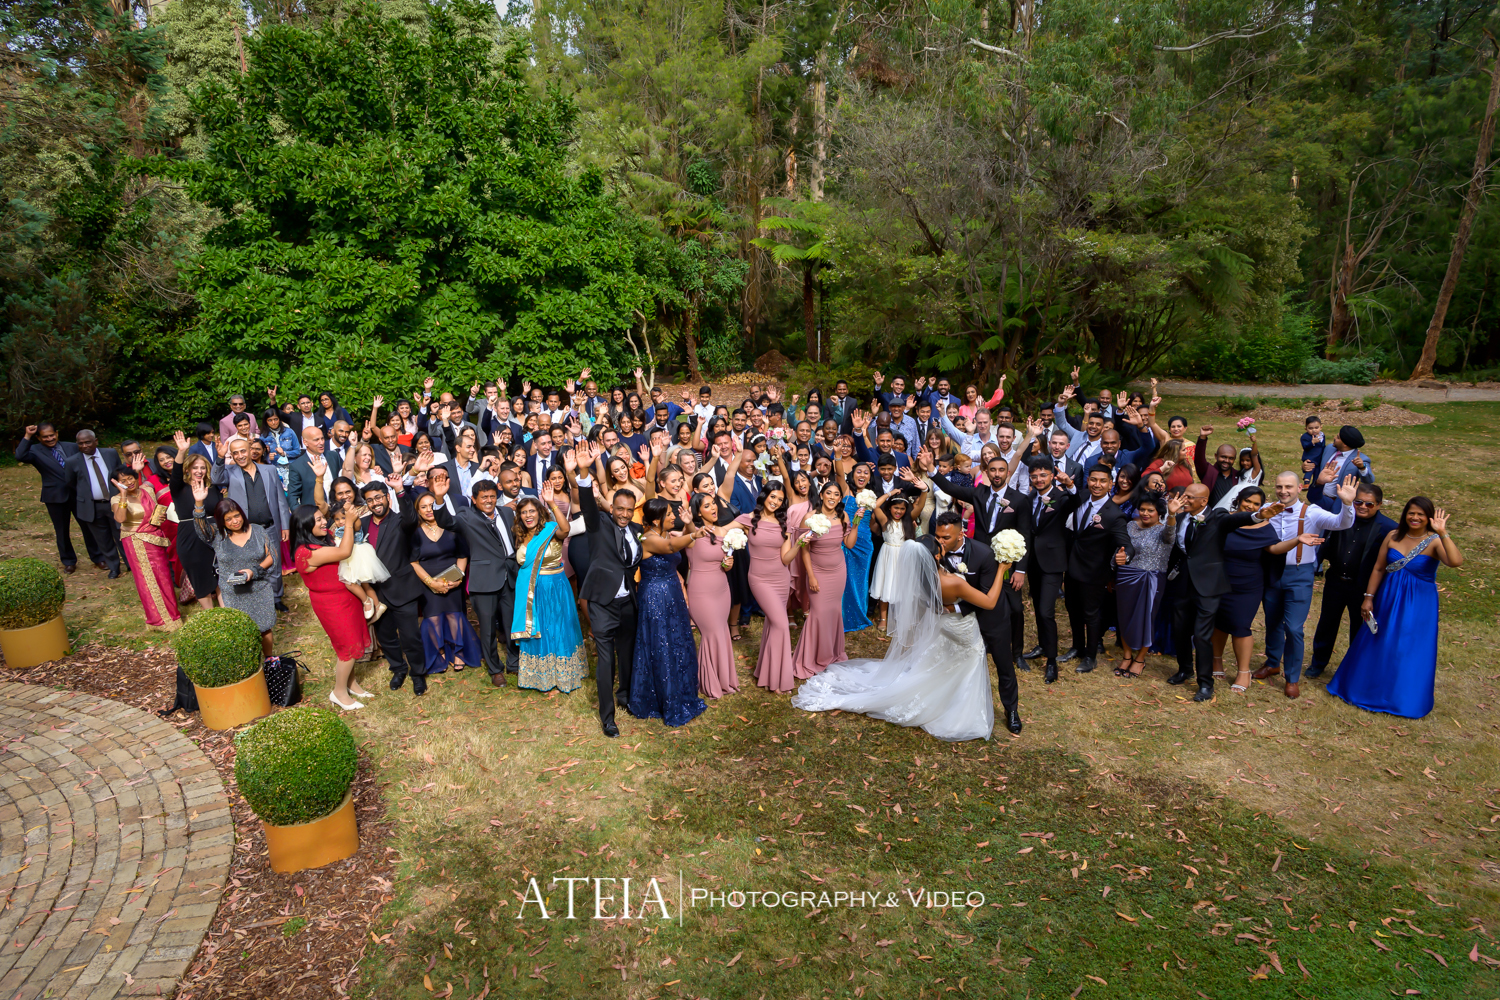 , Caroline and Varone&#8217;s wedding at Tatra Receptions in Mount Dandenong captured by ATEIA Photography &#038; Video